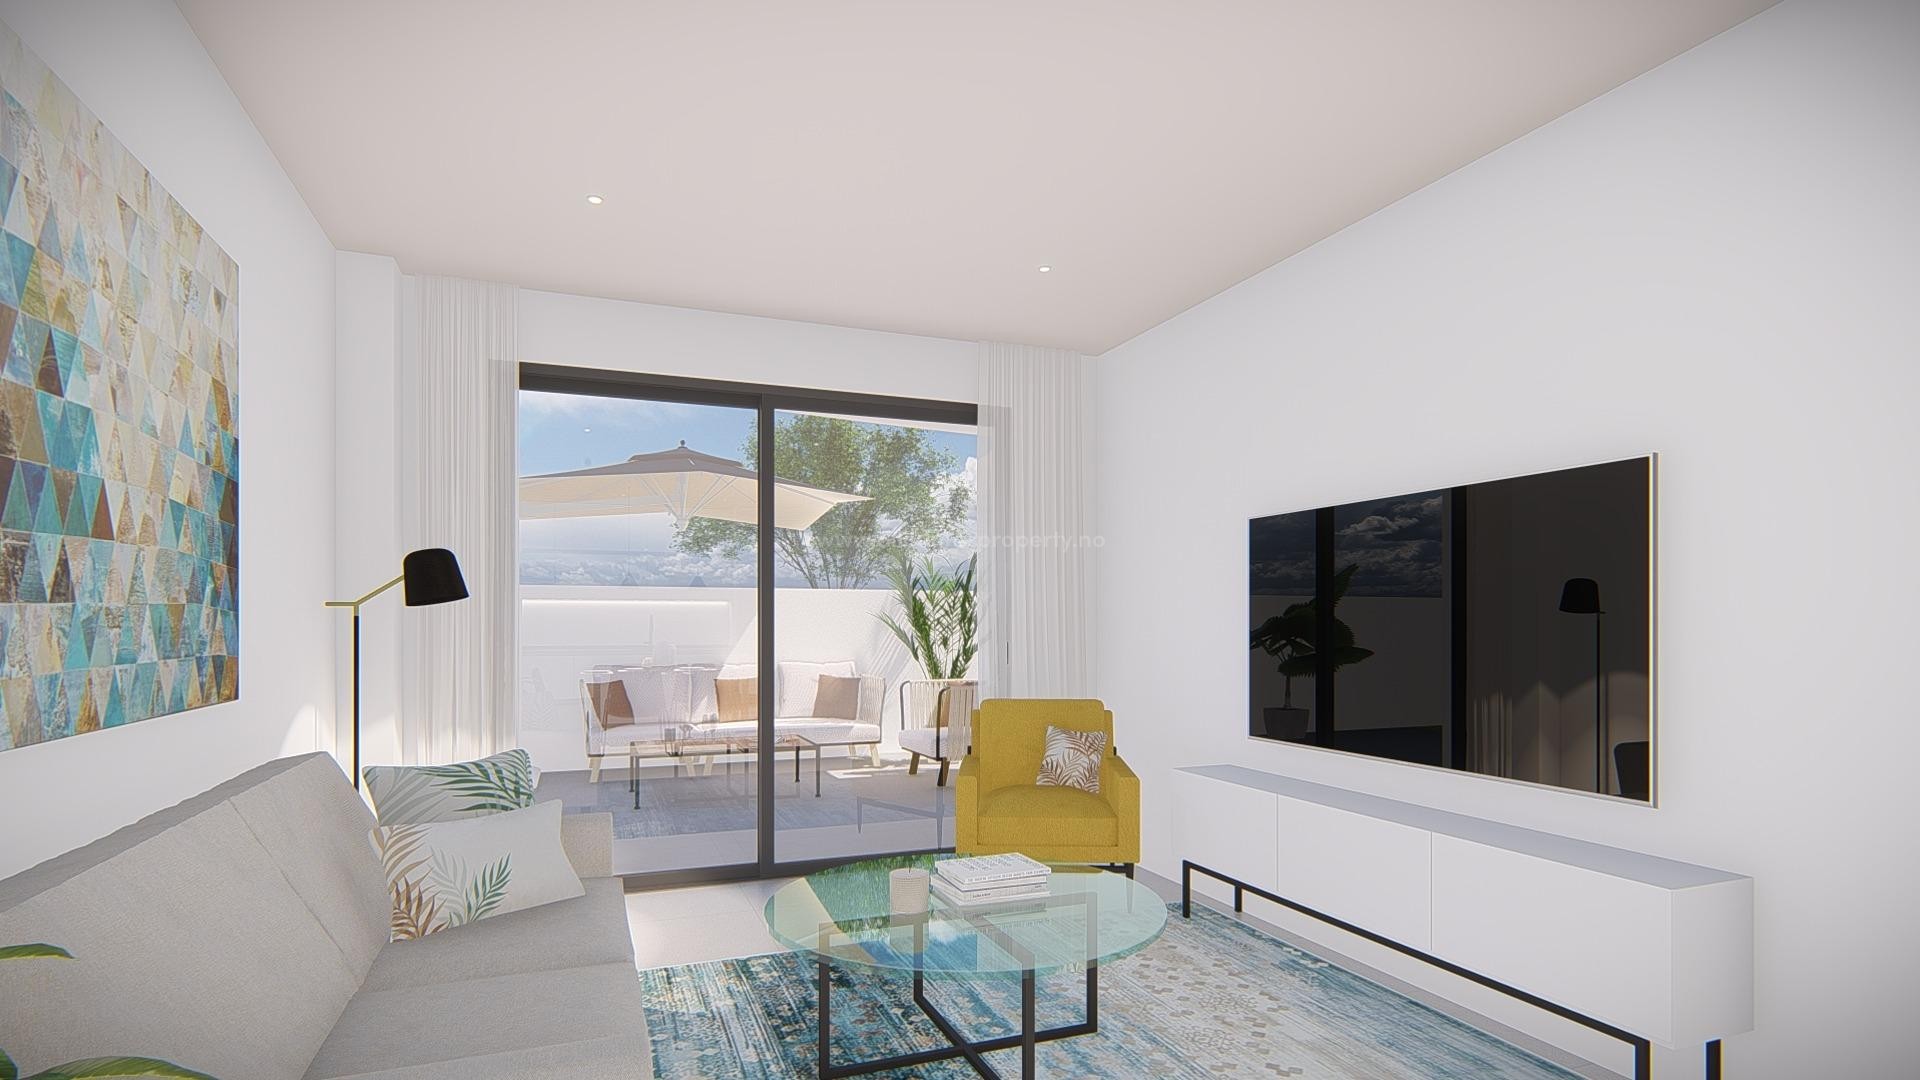 New apartments/flats in Villajoyosa by the sea, 2/3 bedrooms, 2 bathrooms, terrace, solarium or garden. Communal swimming pool and garage. 5 minutes from the beach